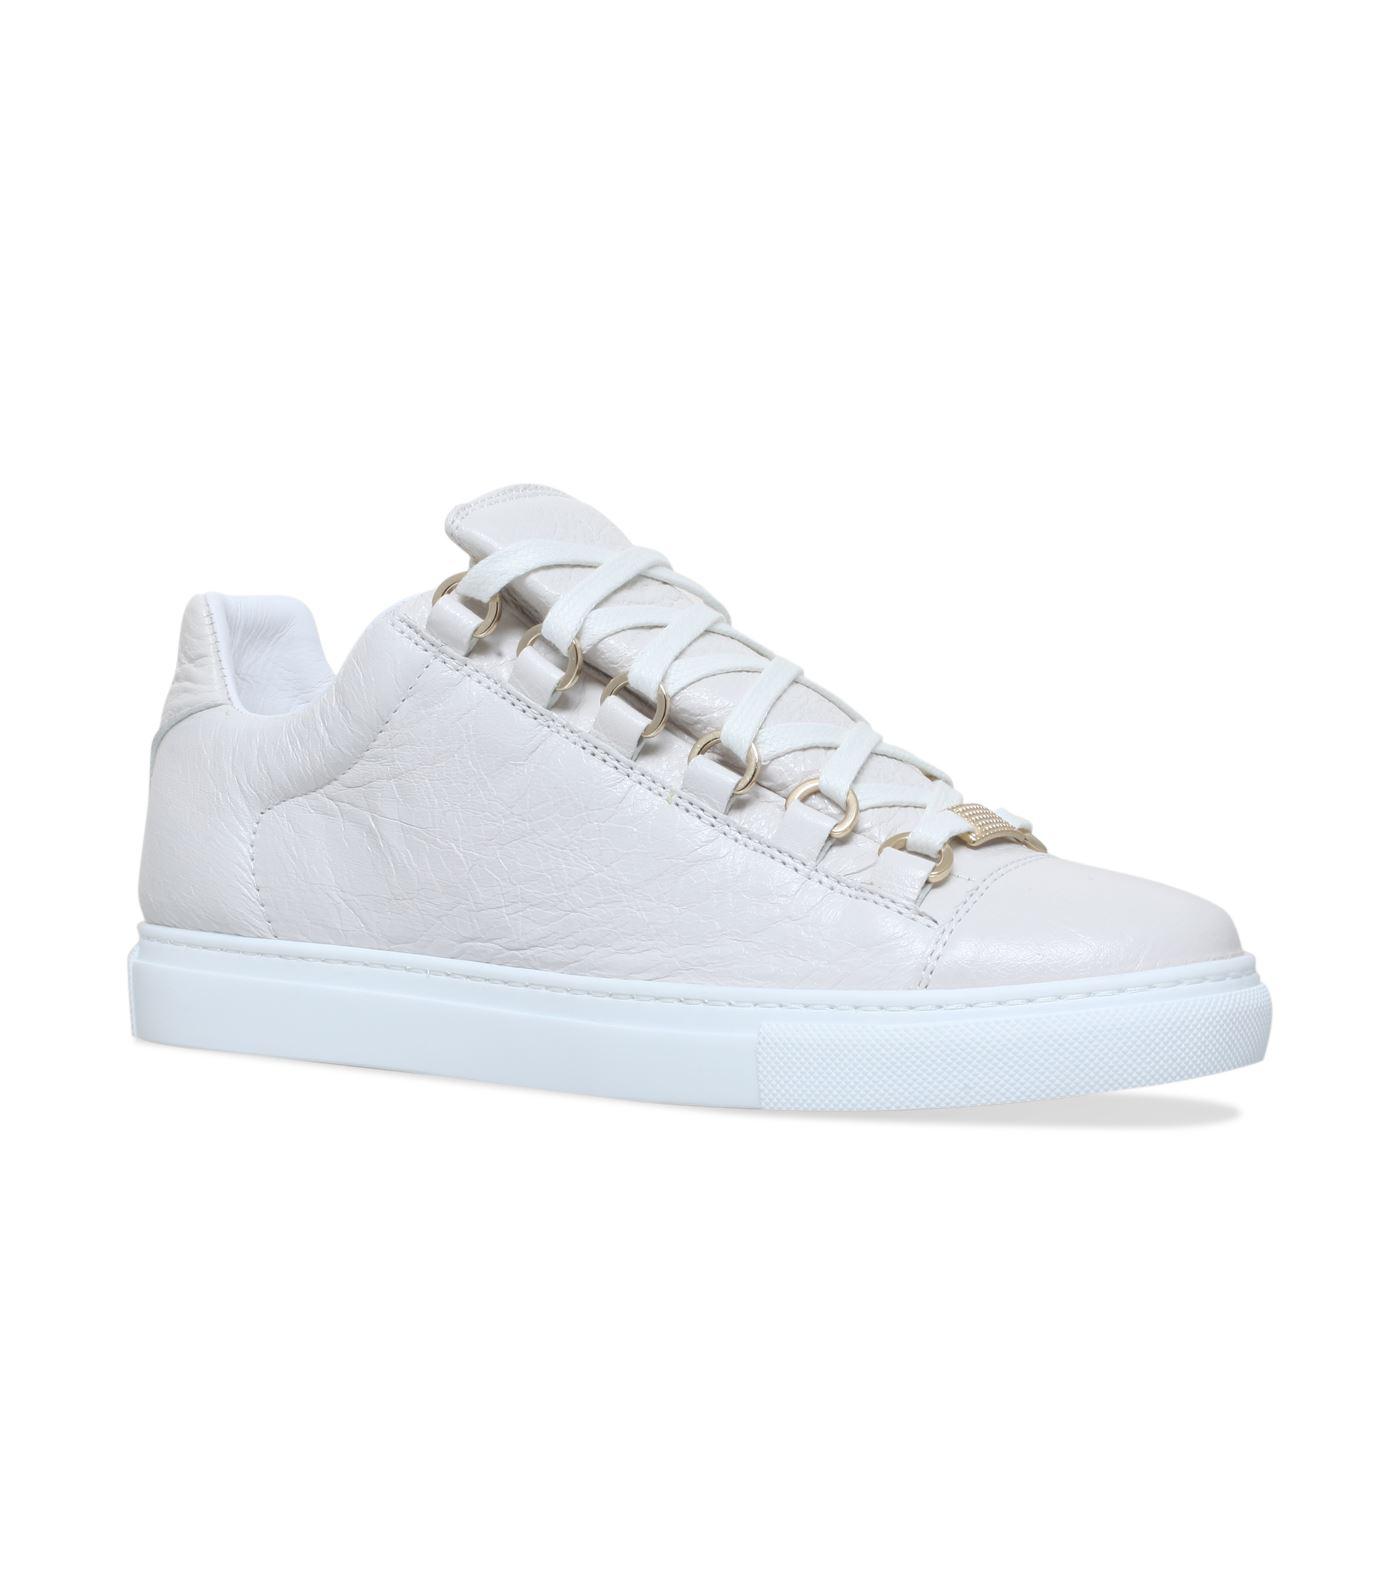 Balenciaga Arena Low Top Sneakers in White - Lyst